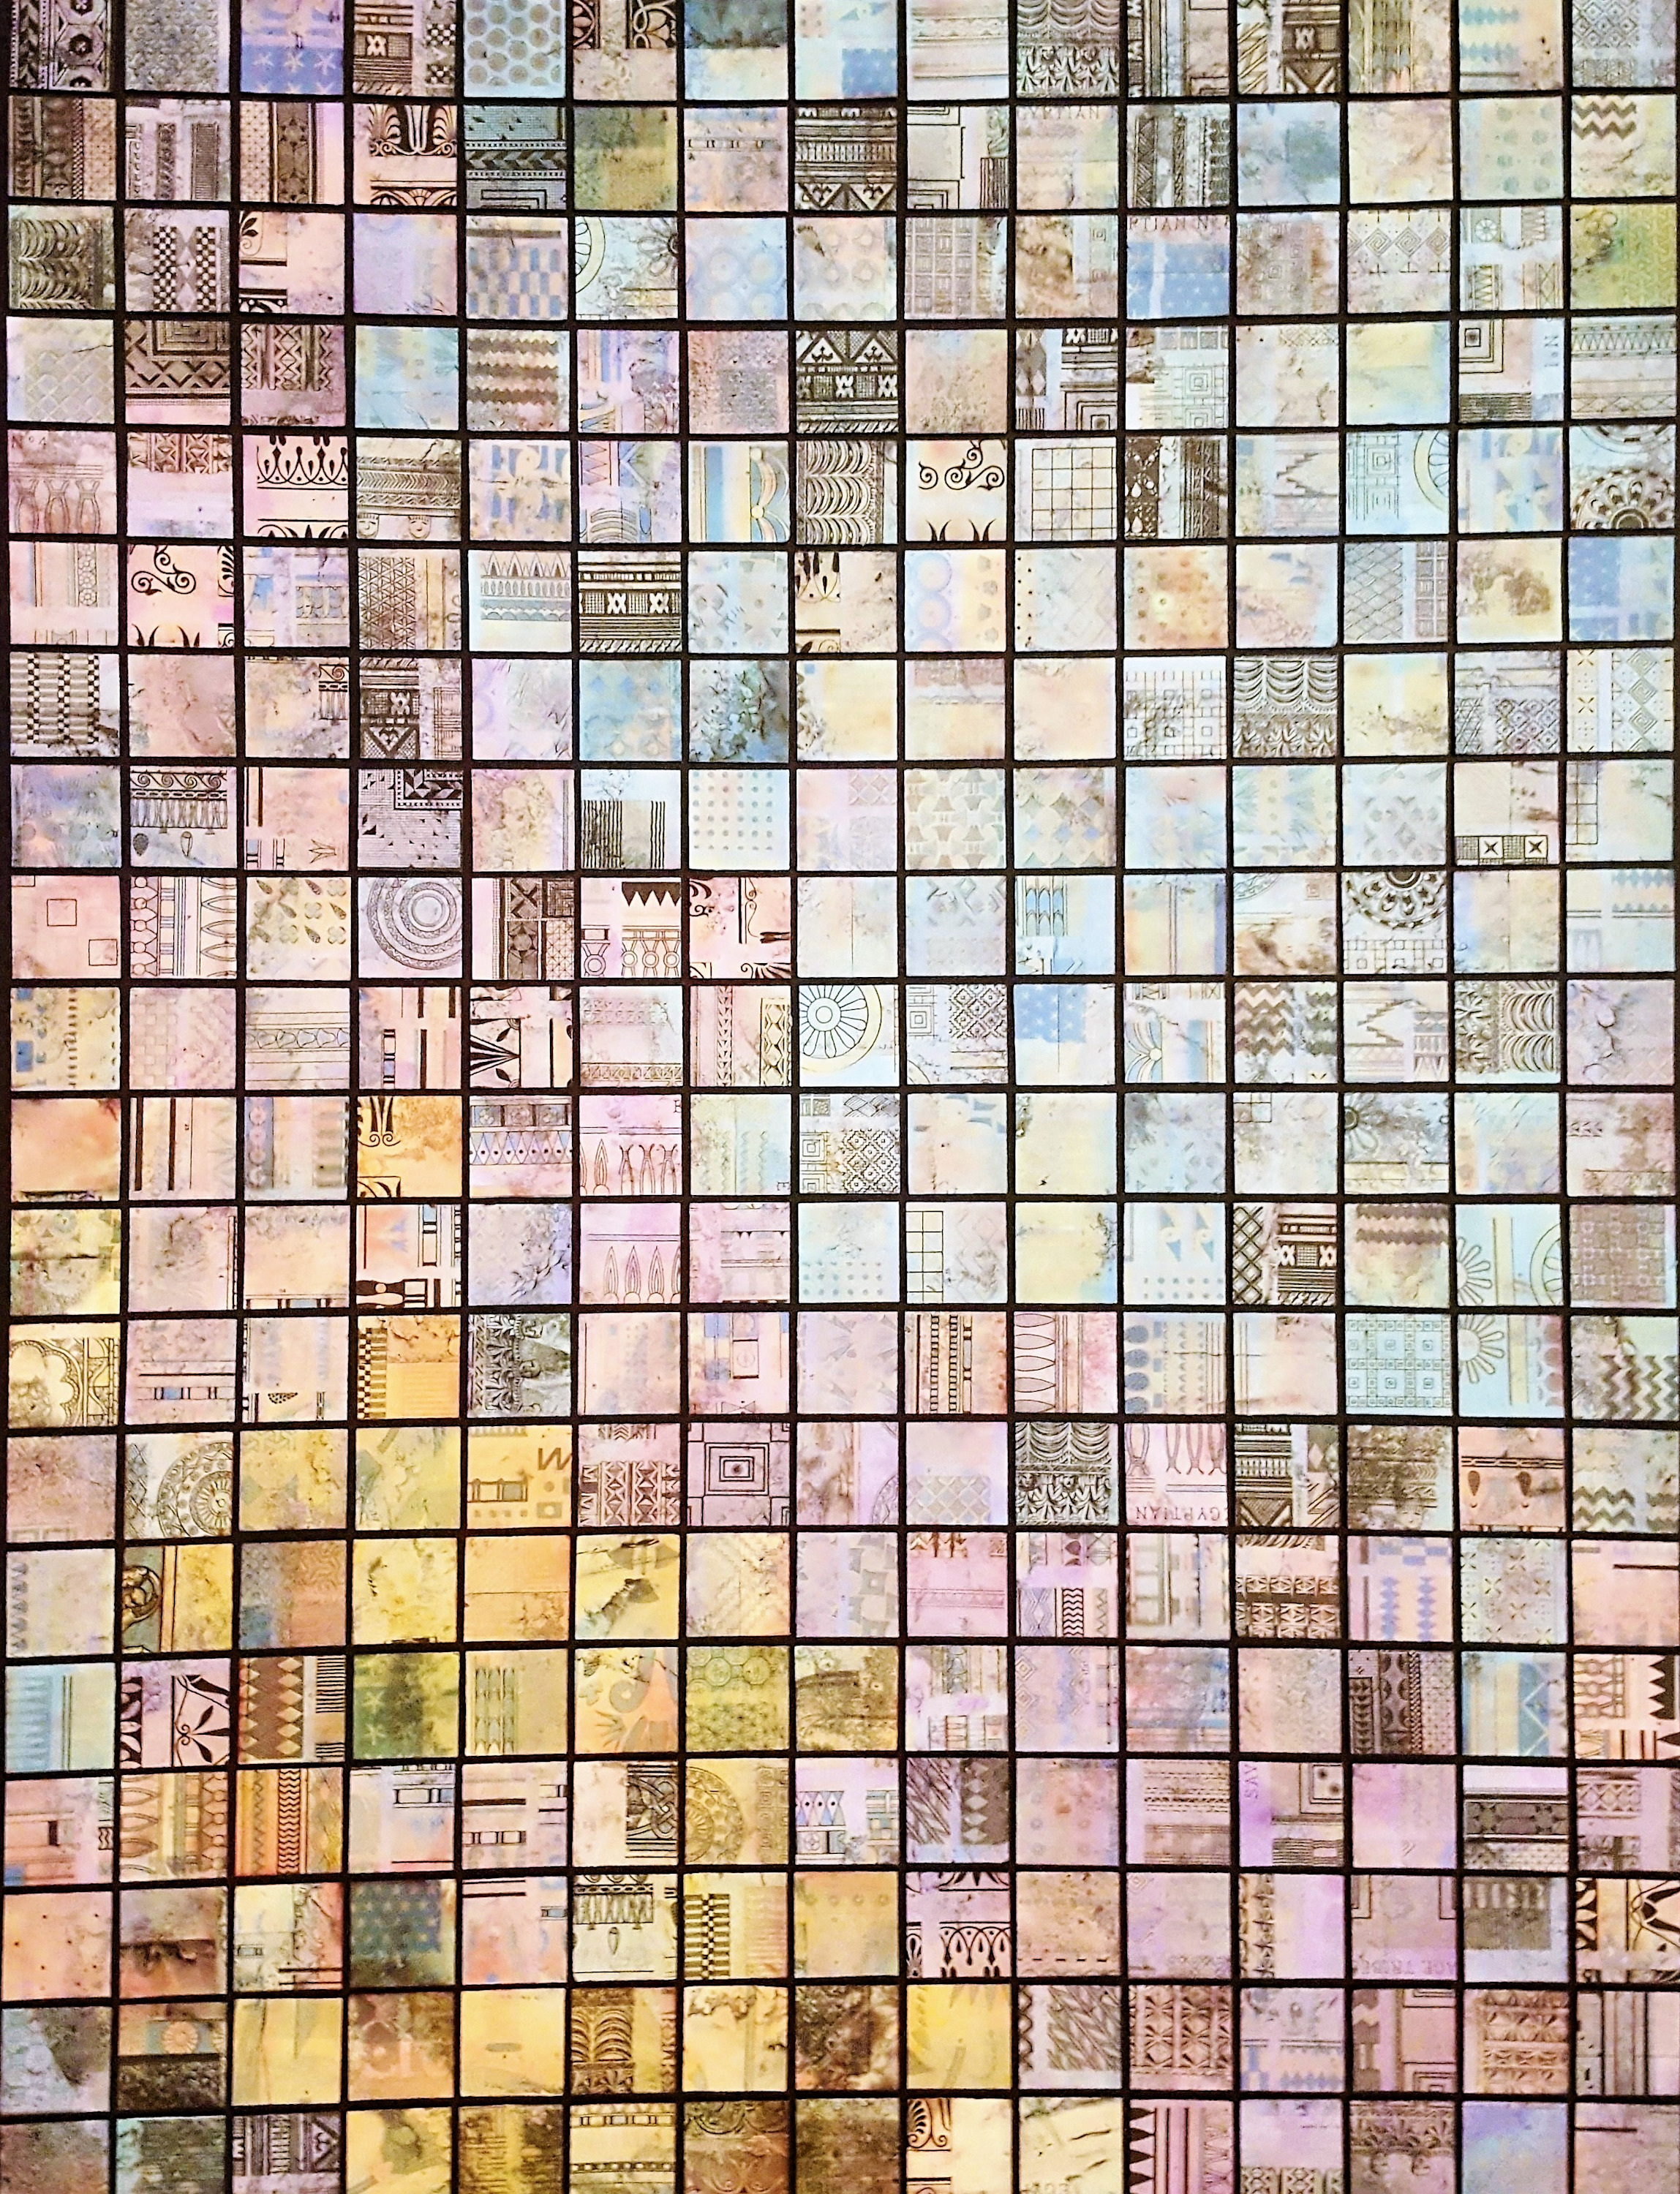 Meditation on the square 3 300 squares by jude barton 45x37 including frame 2200 x9mgsa